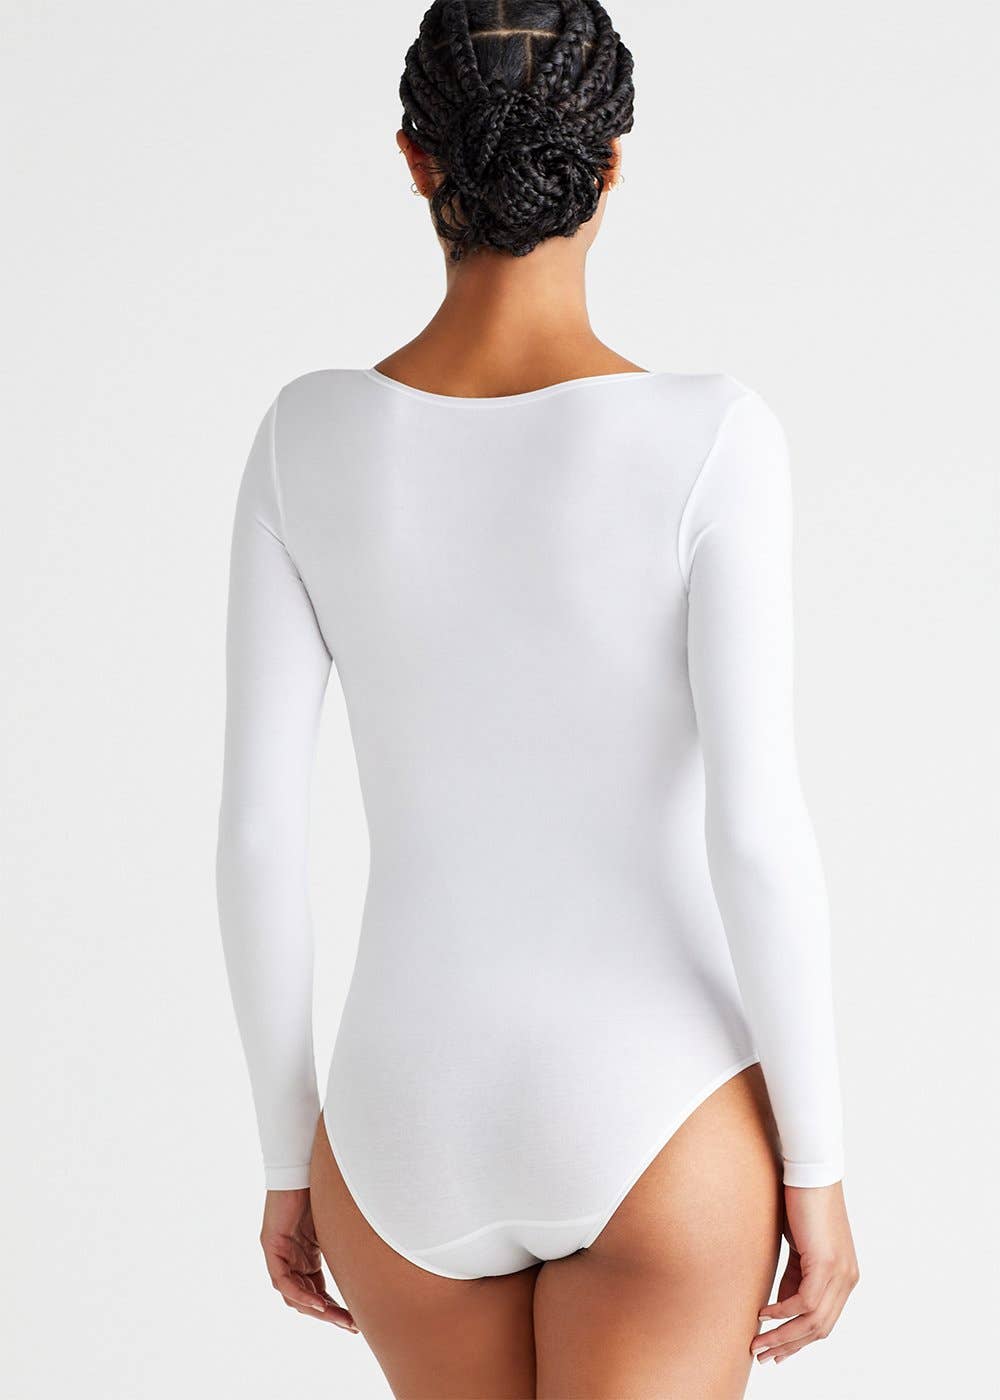 Yummie - Long Sleeve Shaping Bodysuit - Cotton Seamless - Comes in 2 Colors.